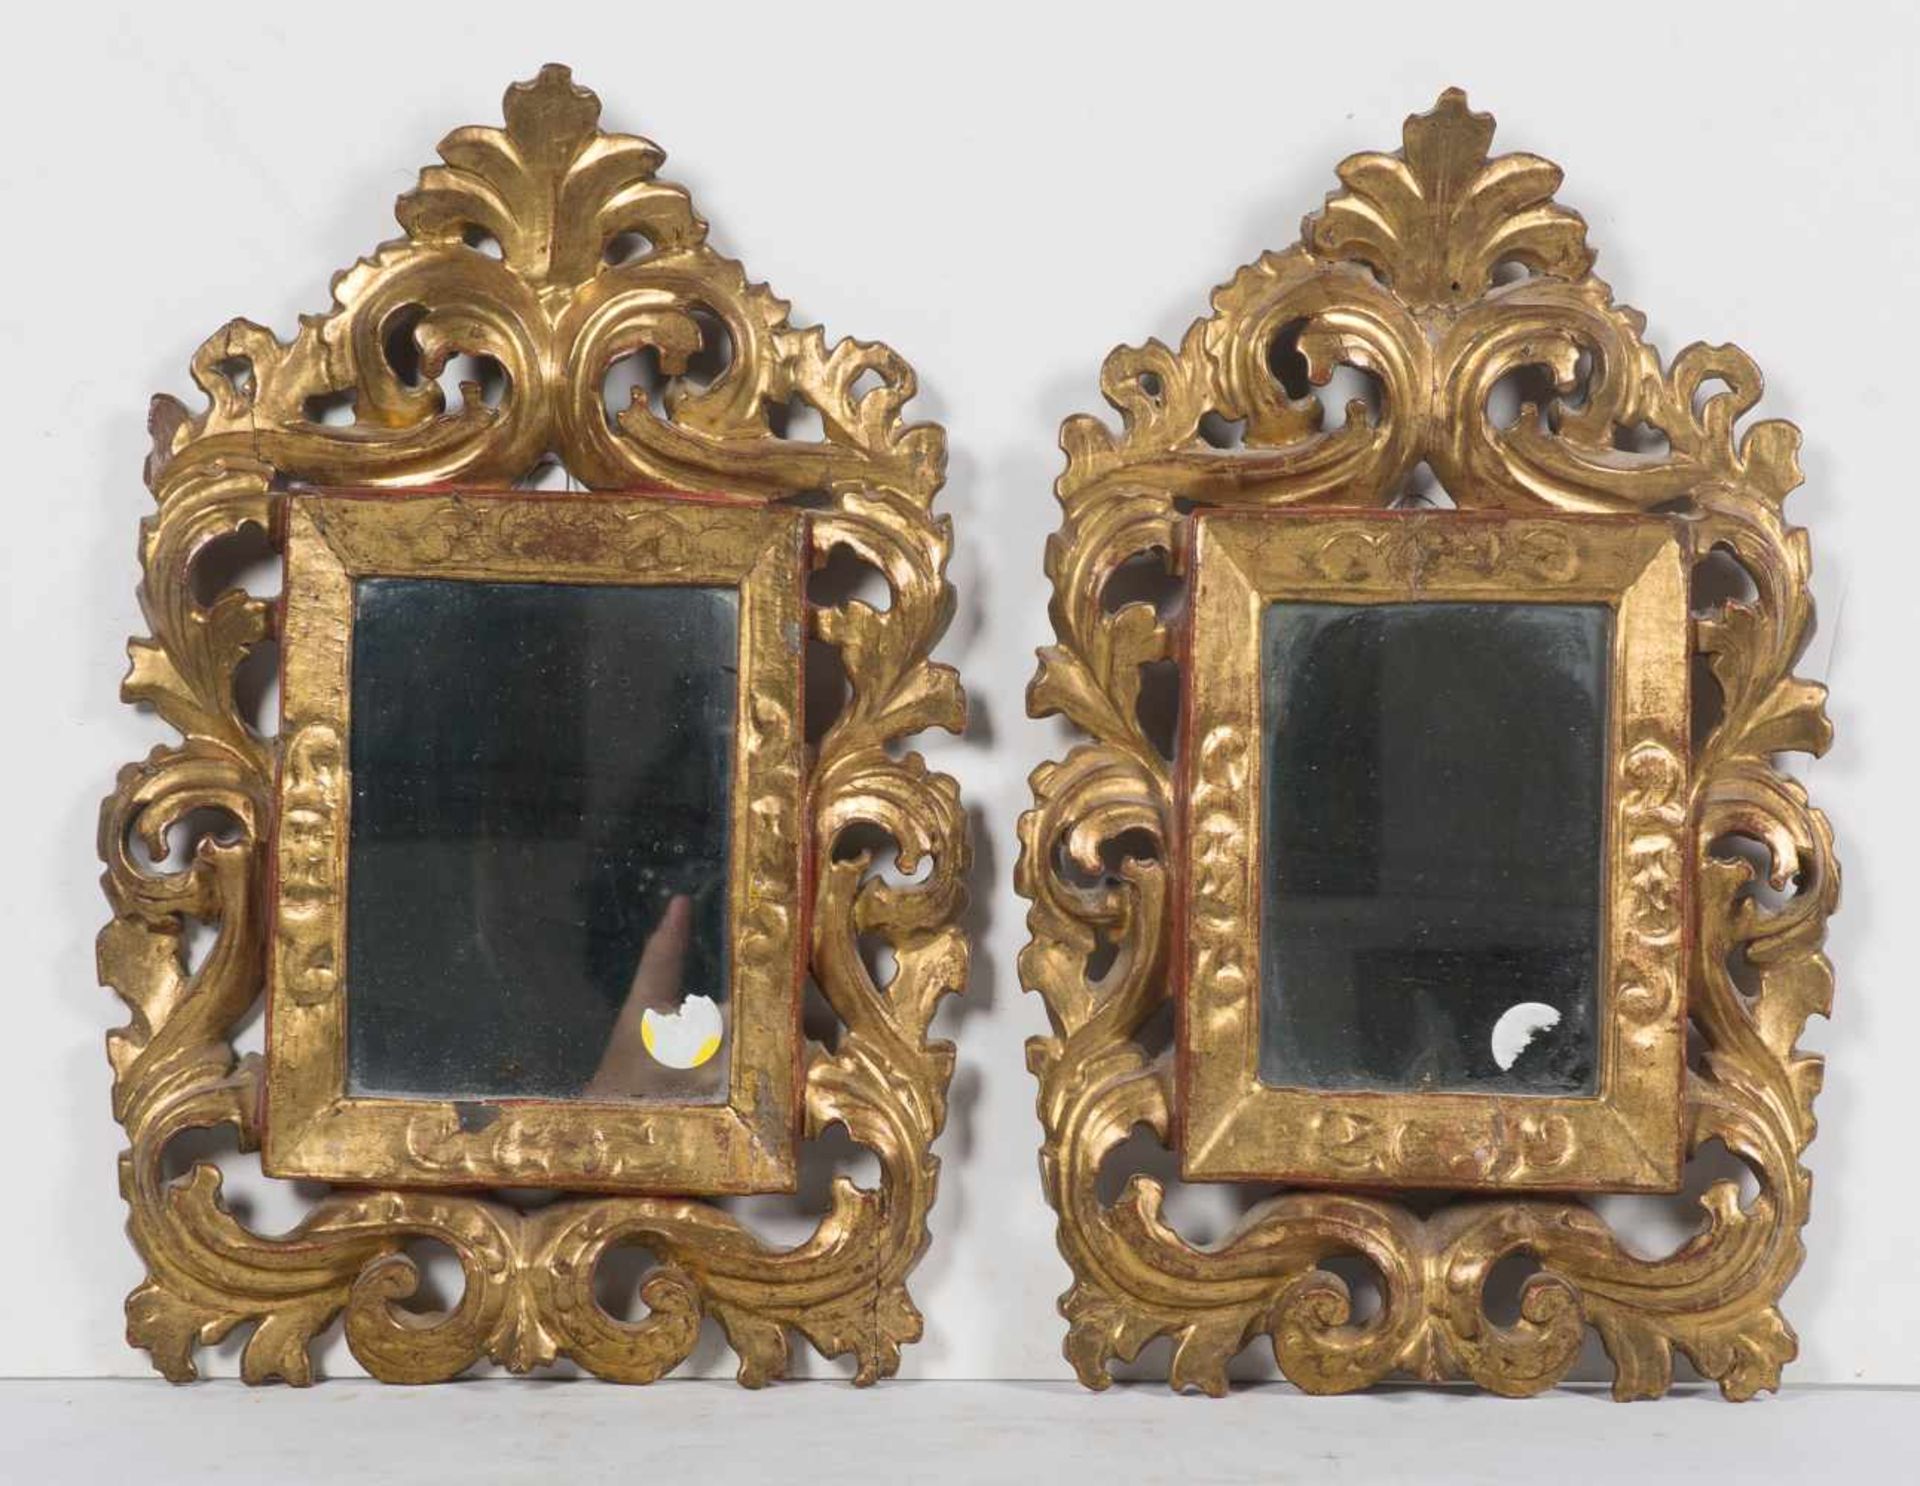 Pair of carved and gilded wooden cornucopias. 18th century.